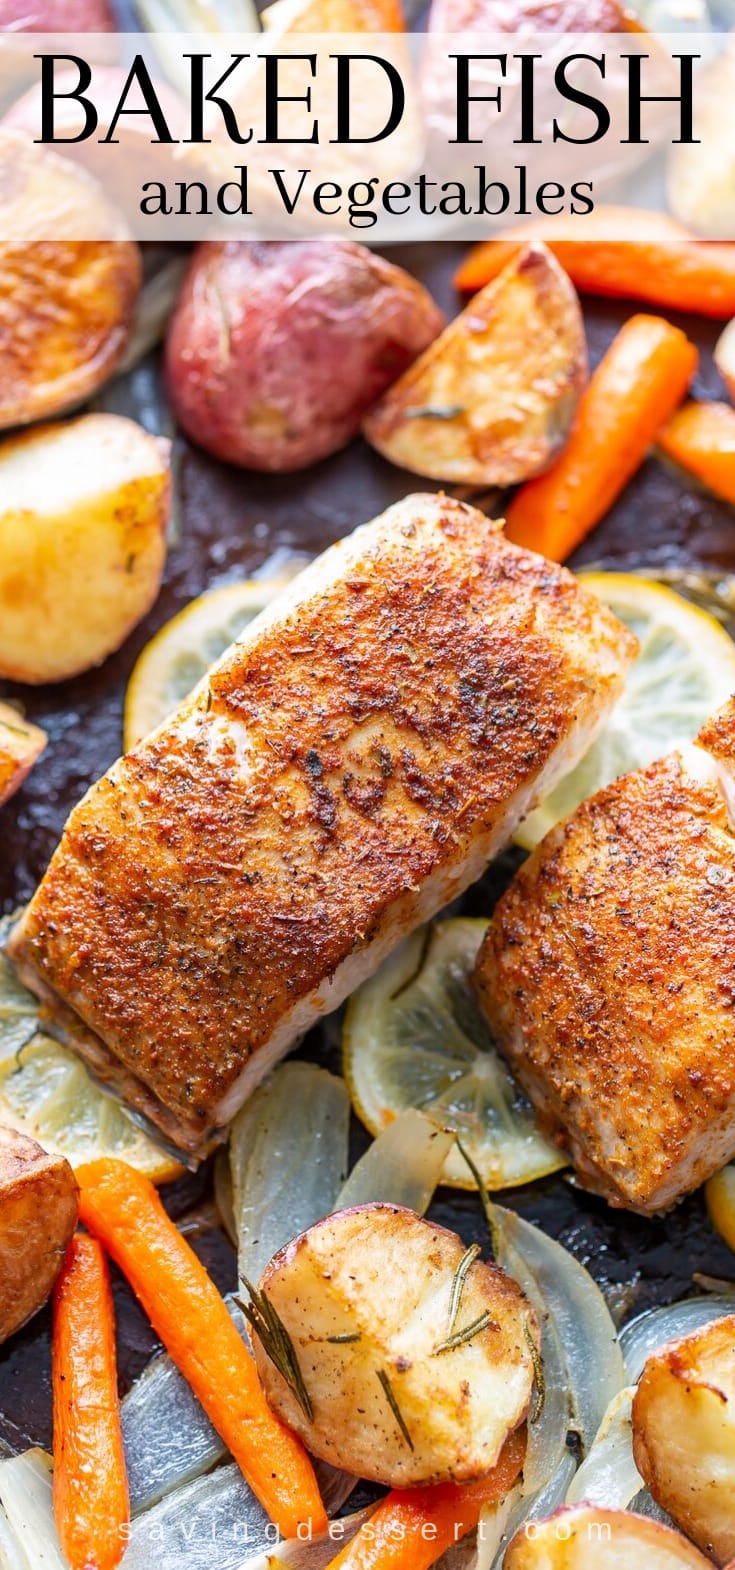 A sheet pan with baked fish and vegetables